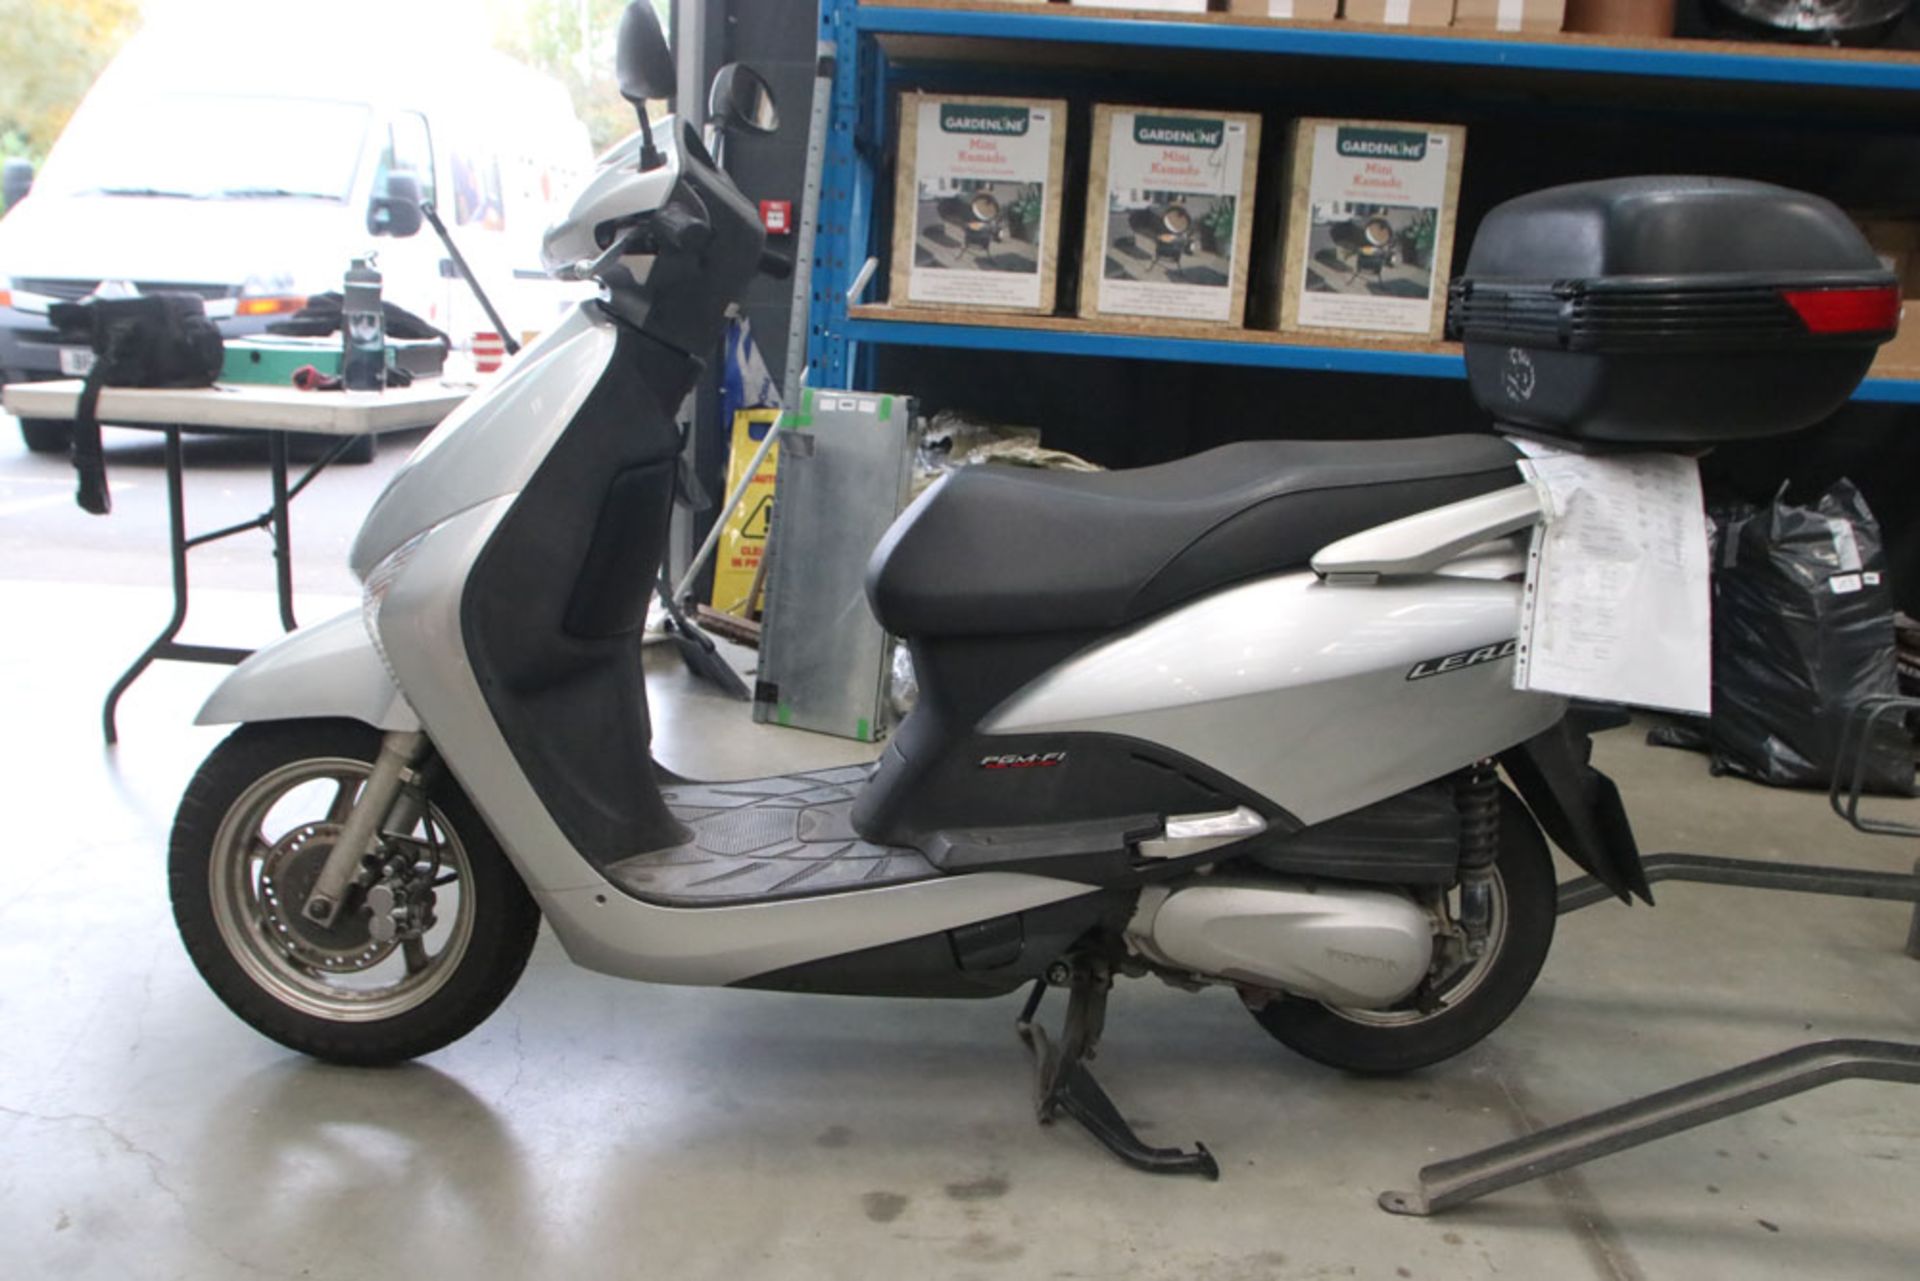 LG59 TBZ (2009) Honda LEAD NHX110 petrol 108cc powered scooter in silver, with MOT until 27/09/22 - Image 3 of 3